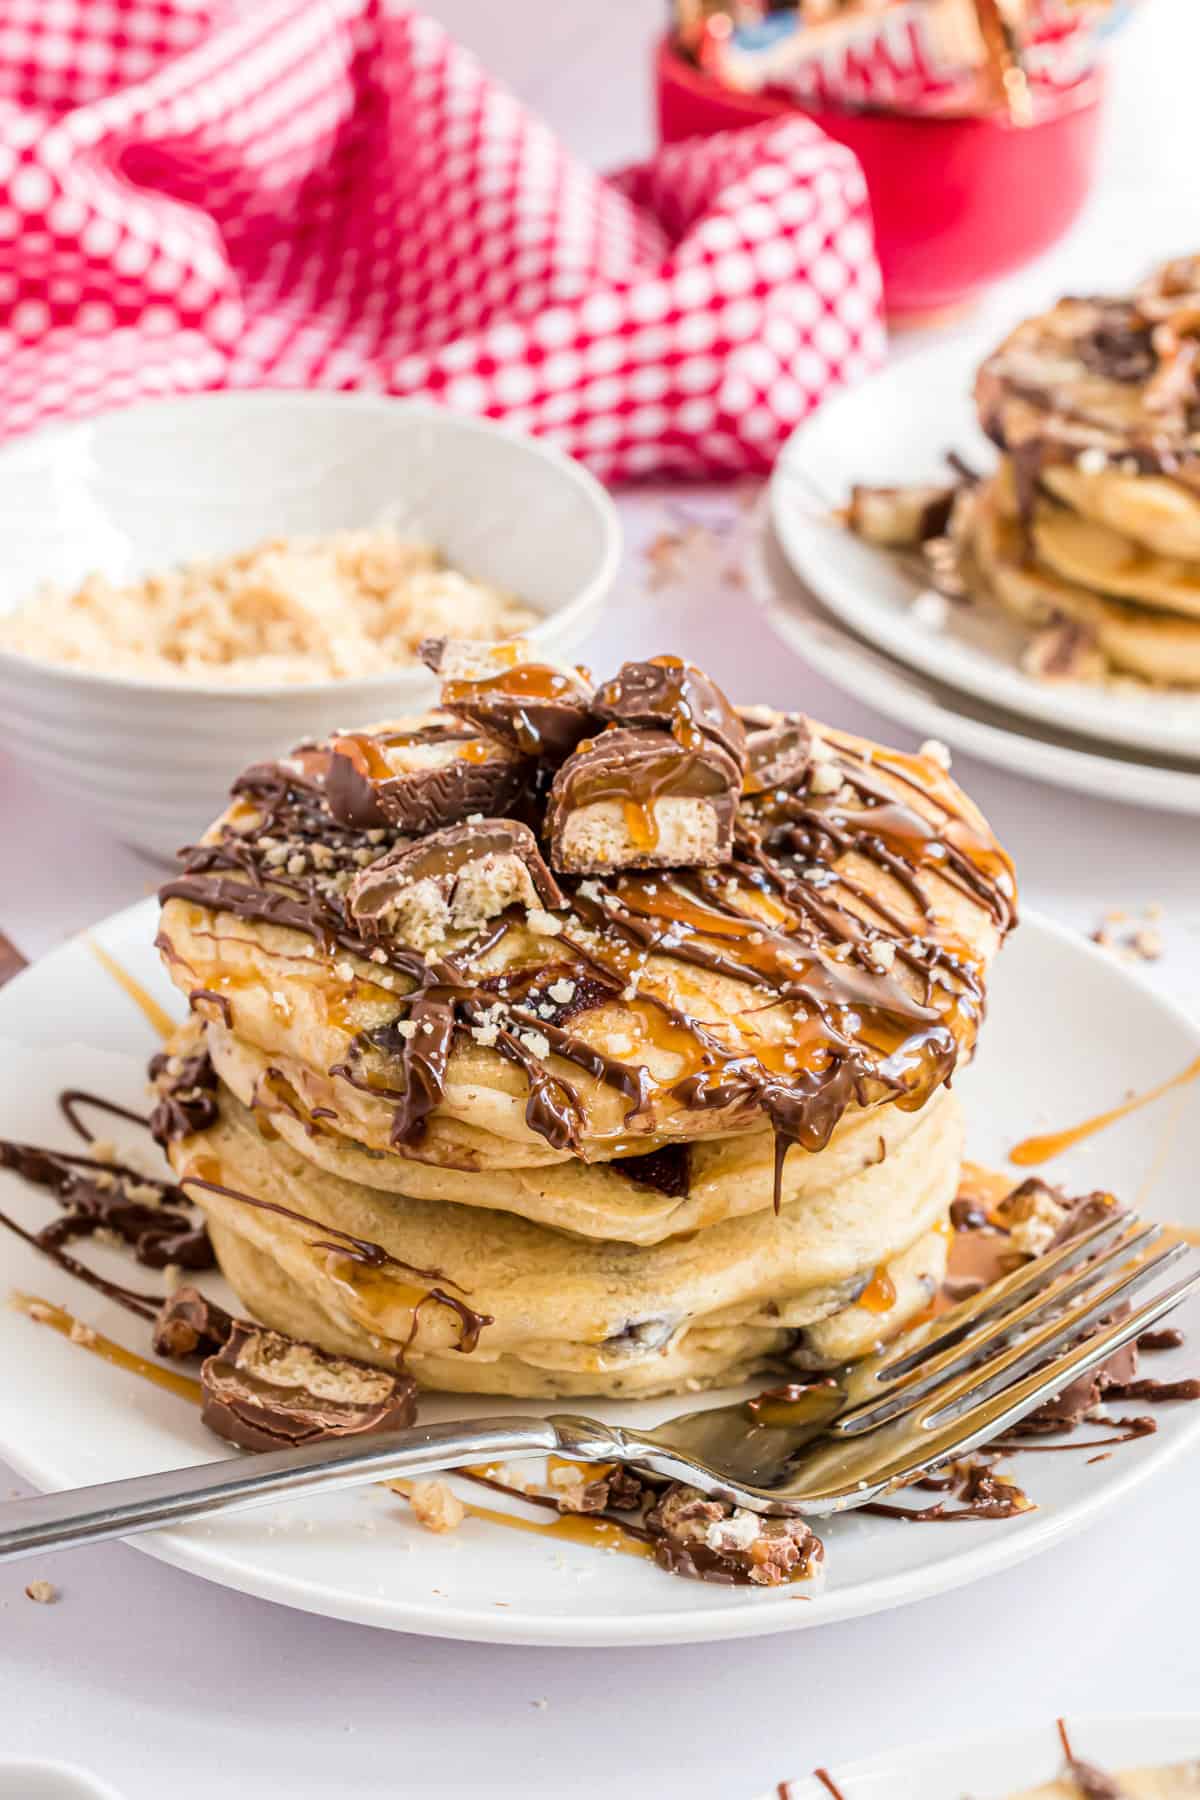 Pancakes piled high with toppings.